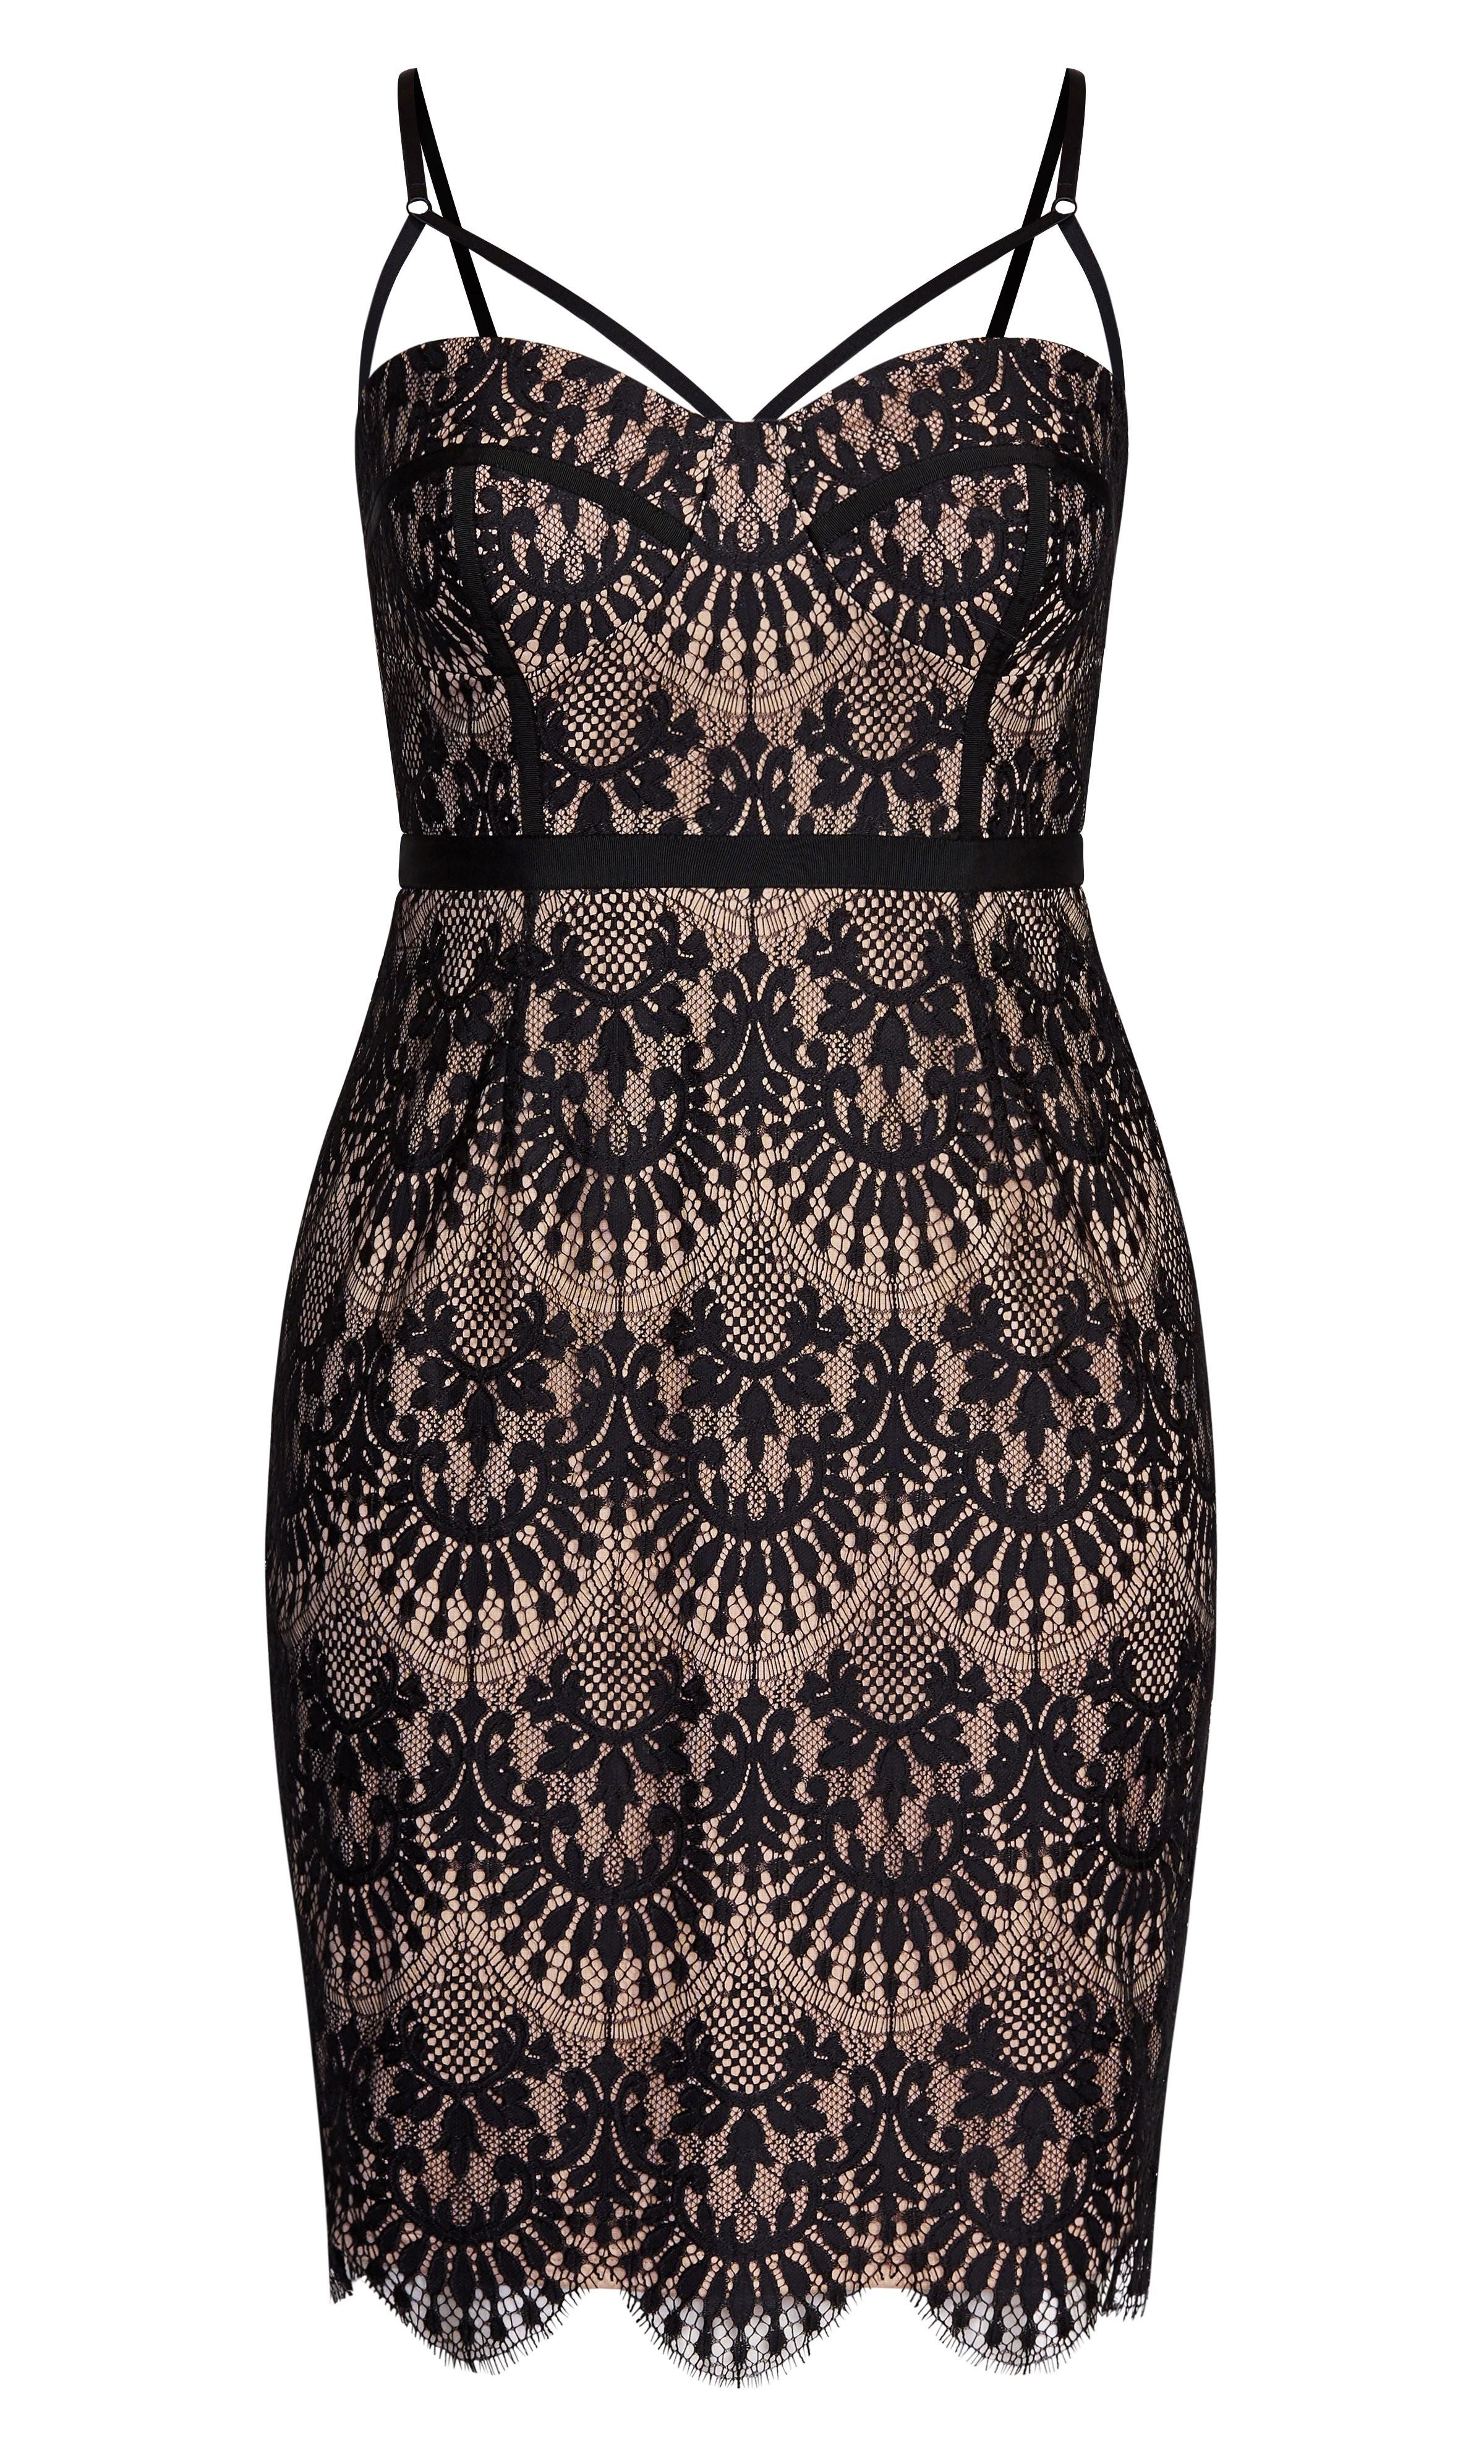 City Chic Lace Brianna Dress in Black Nude (Black) - Save 40% - Lyst